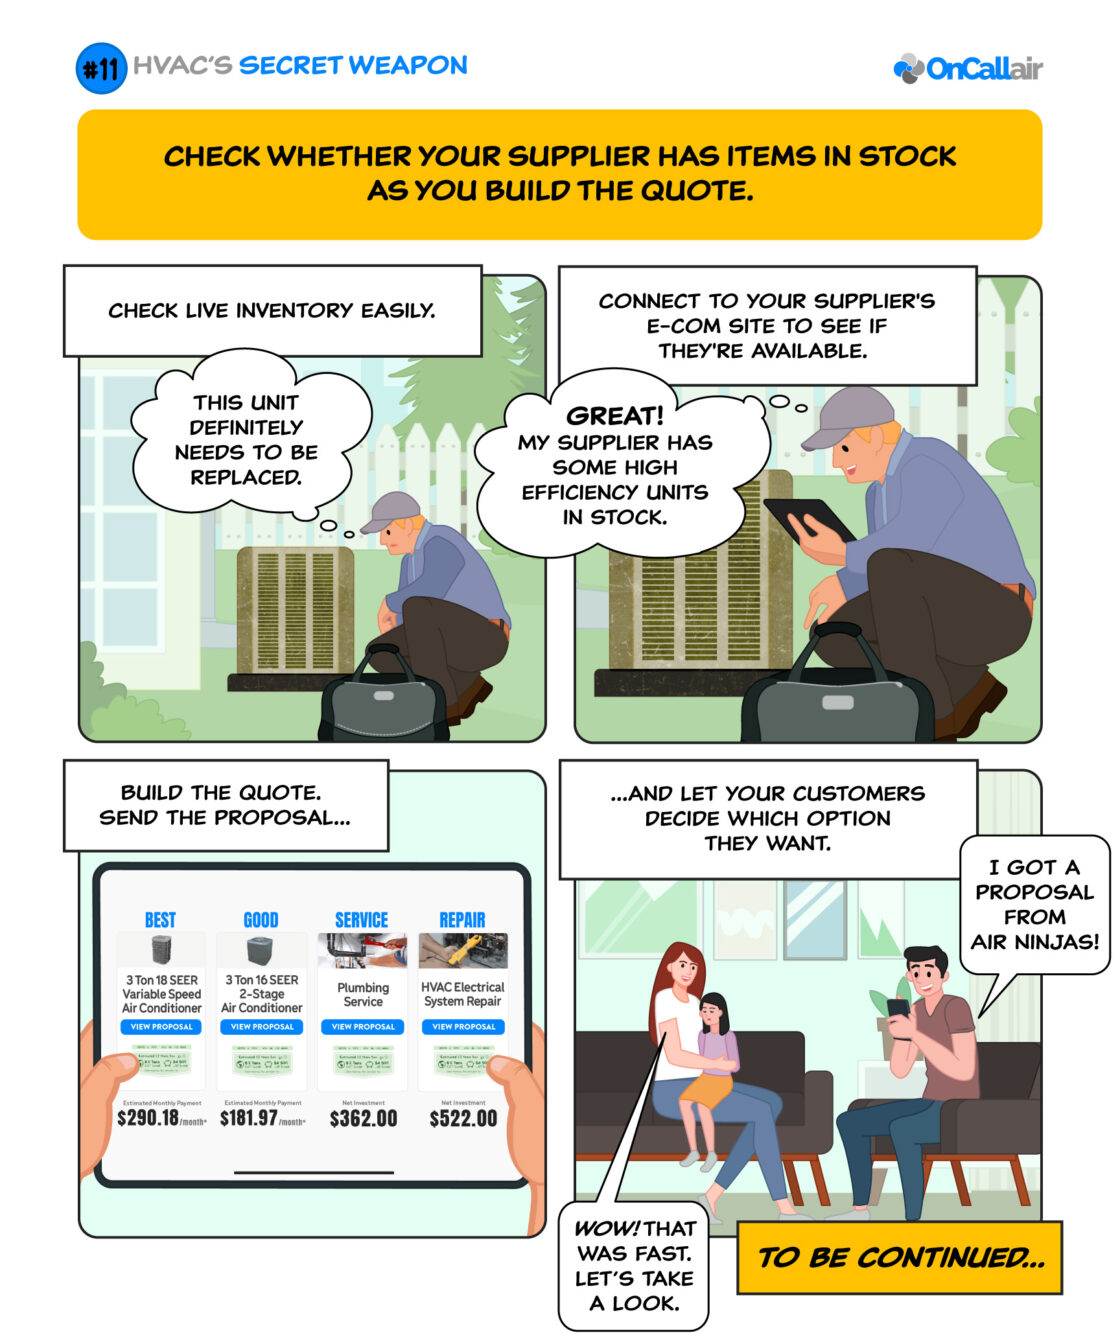 #11 Check Supplier’s Live Inventory